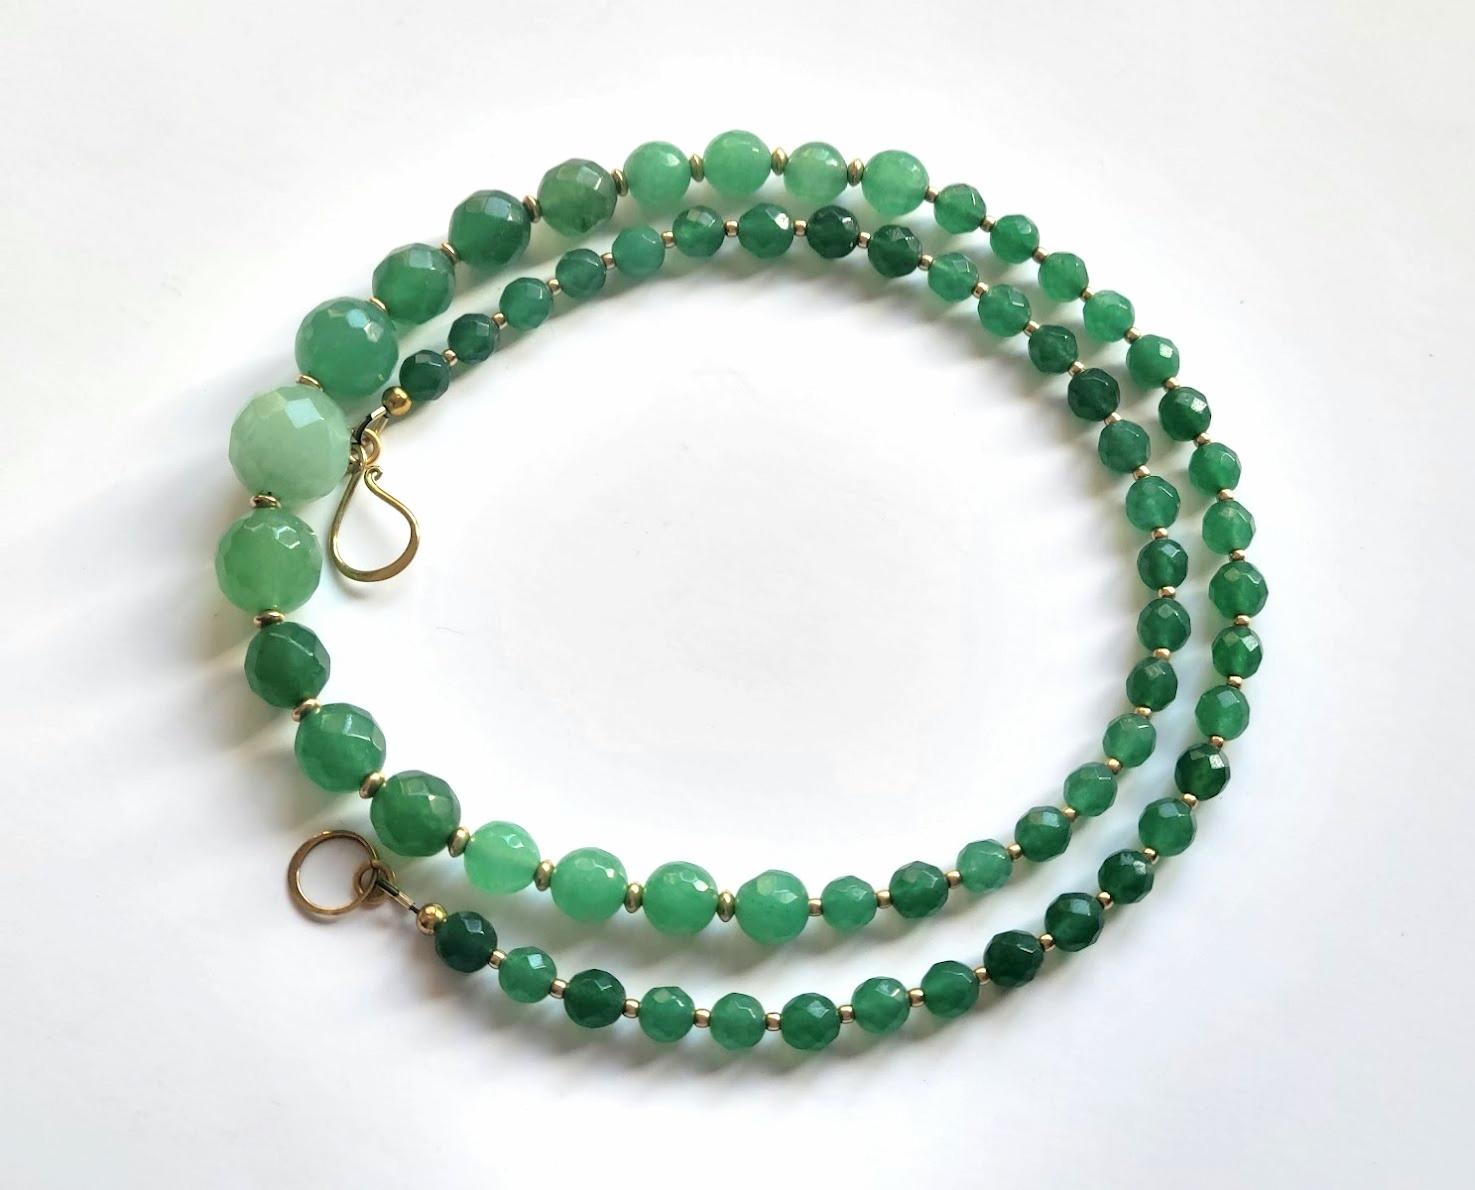 The length of the necklace is 23 inches (58.4 cm). The size of the beads varies from 6 mm to 13 mm.
The color of the faceted beads is vibrant, saturated, apple green, semi-transparent, and emerald green. High-quality faceted green beryl beads from